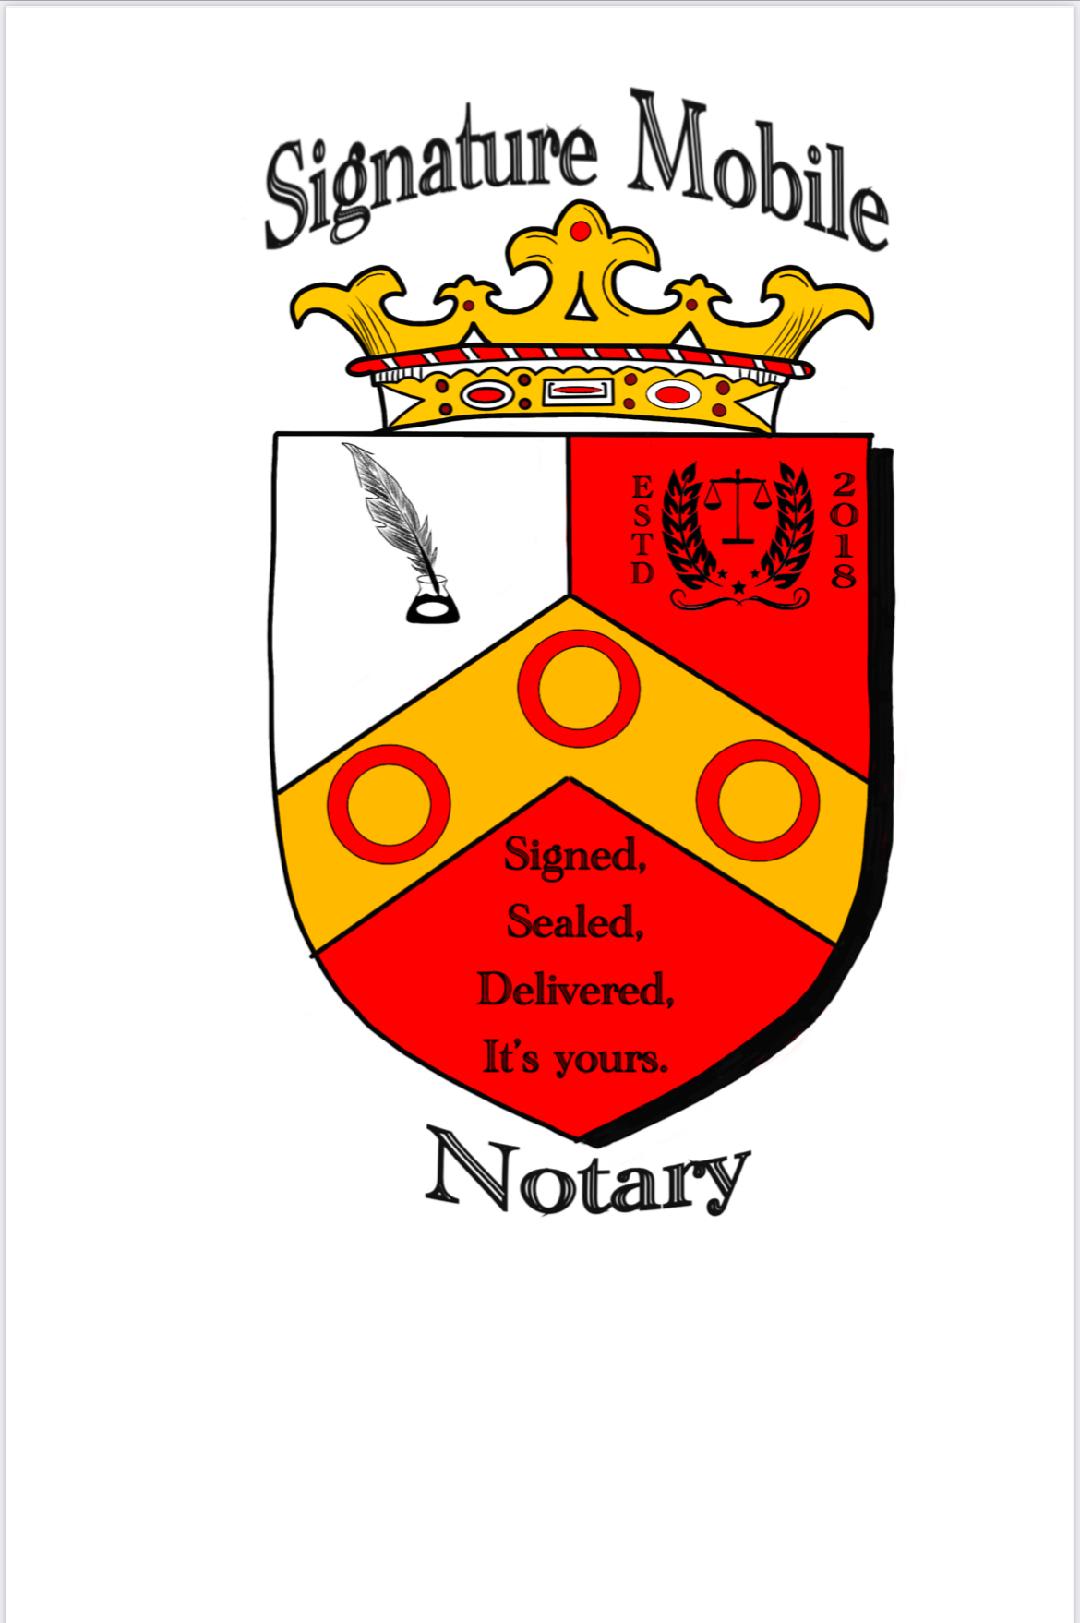 Signature Mobile Notary, LLP